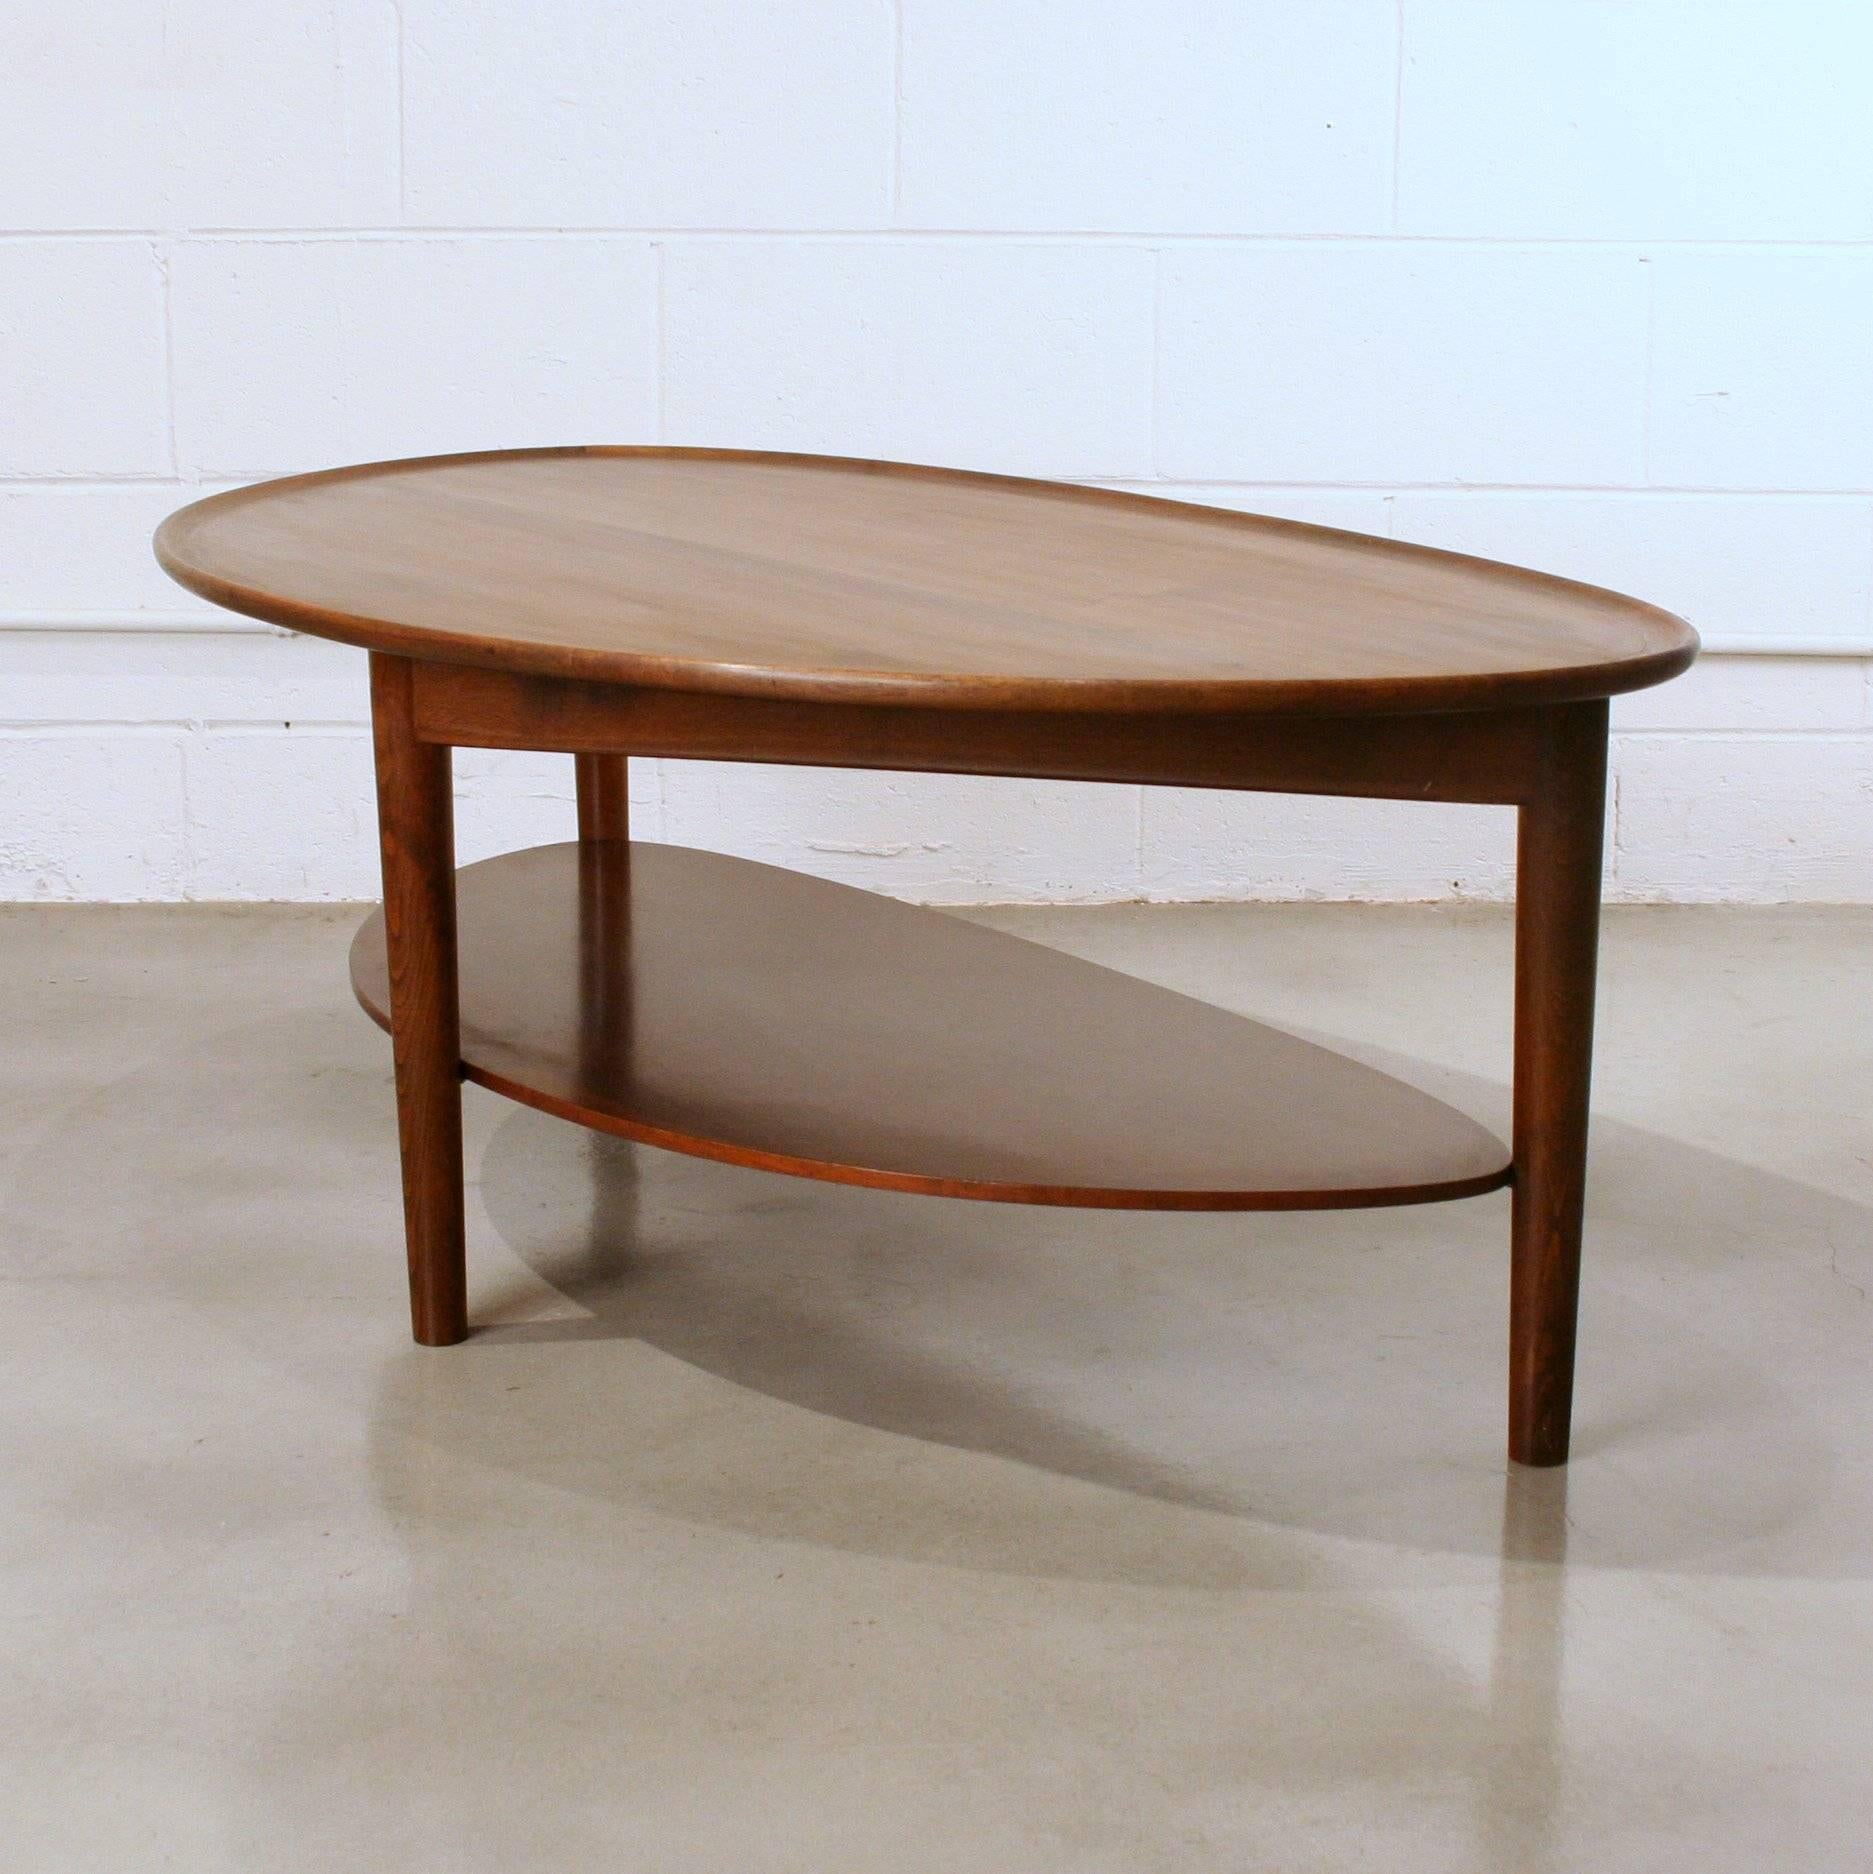 Vintage walnut coffee table in a kidney shape featuring a single shelf below the tabletop and a solid walnut tapered trim. Made in Denmark.
 